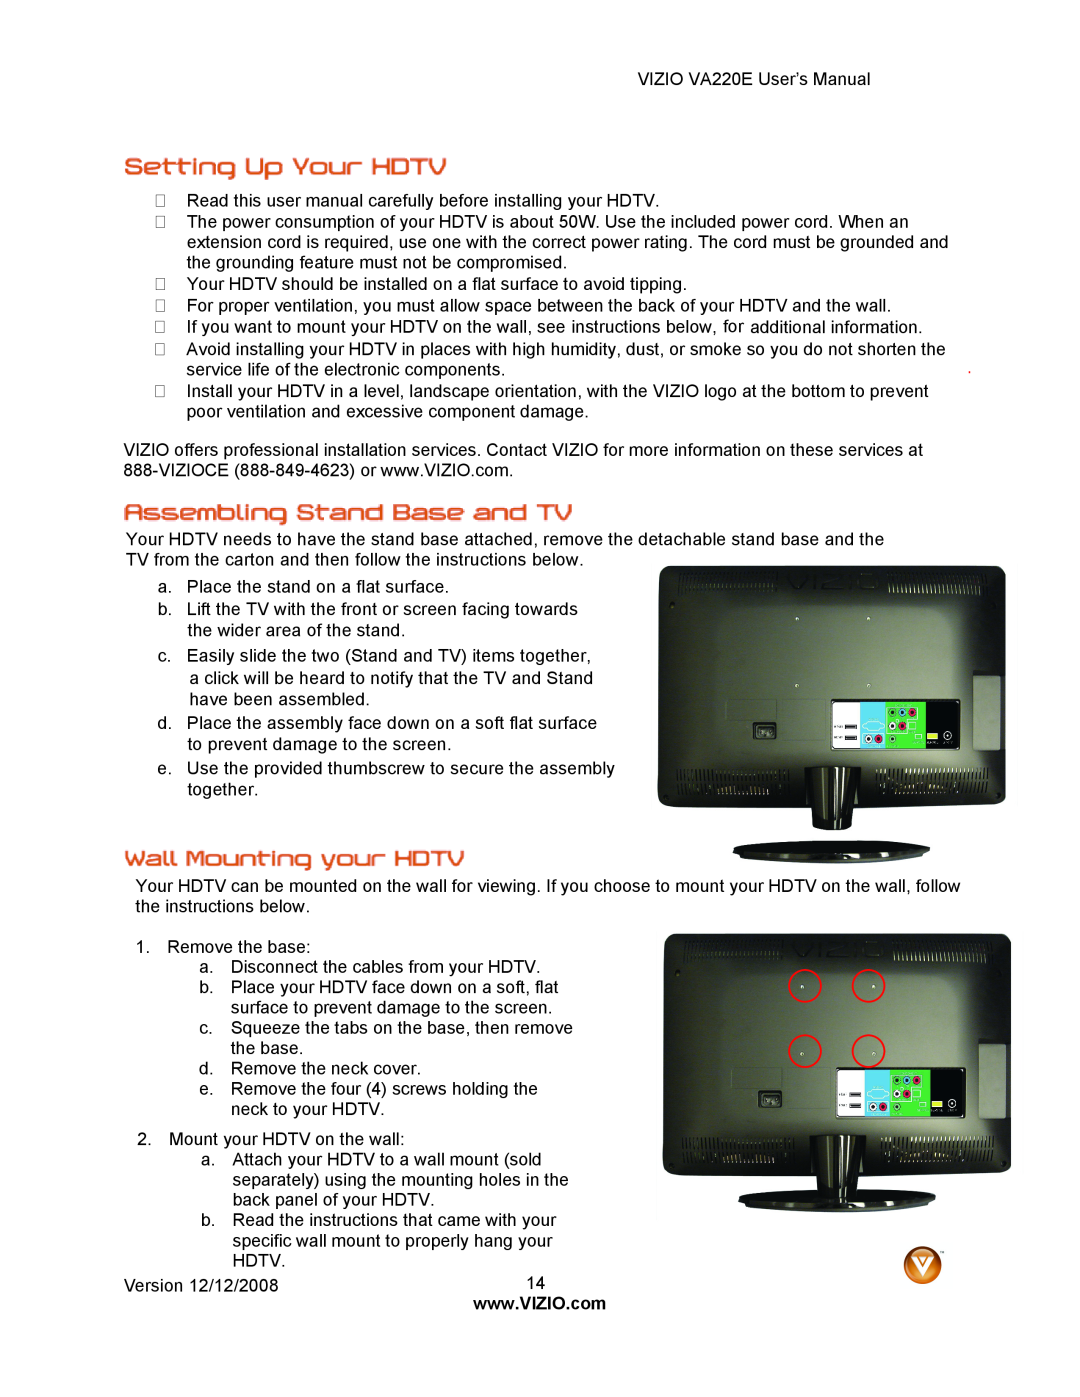 Vizio VA220E user manual a. Place the stand on a flat surface 